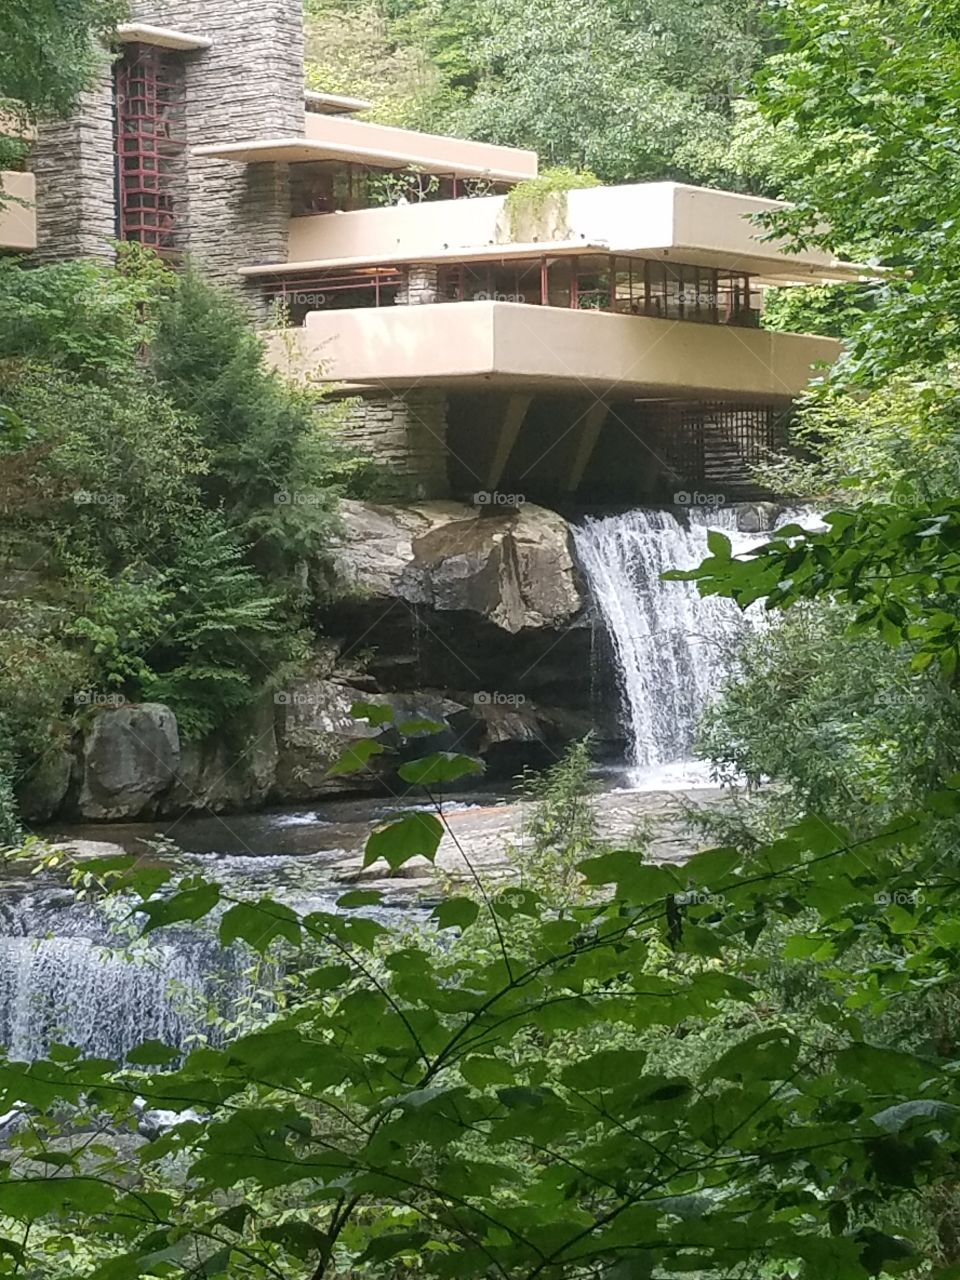 This photo is a side view of Fallingwater, a house designed by architect Frank Lloyd Wright. The house was built over a river, which flows below the living room, and has a waterfall cascading down the side.